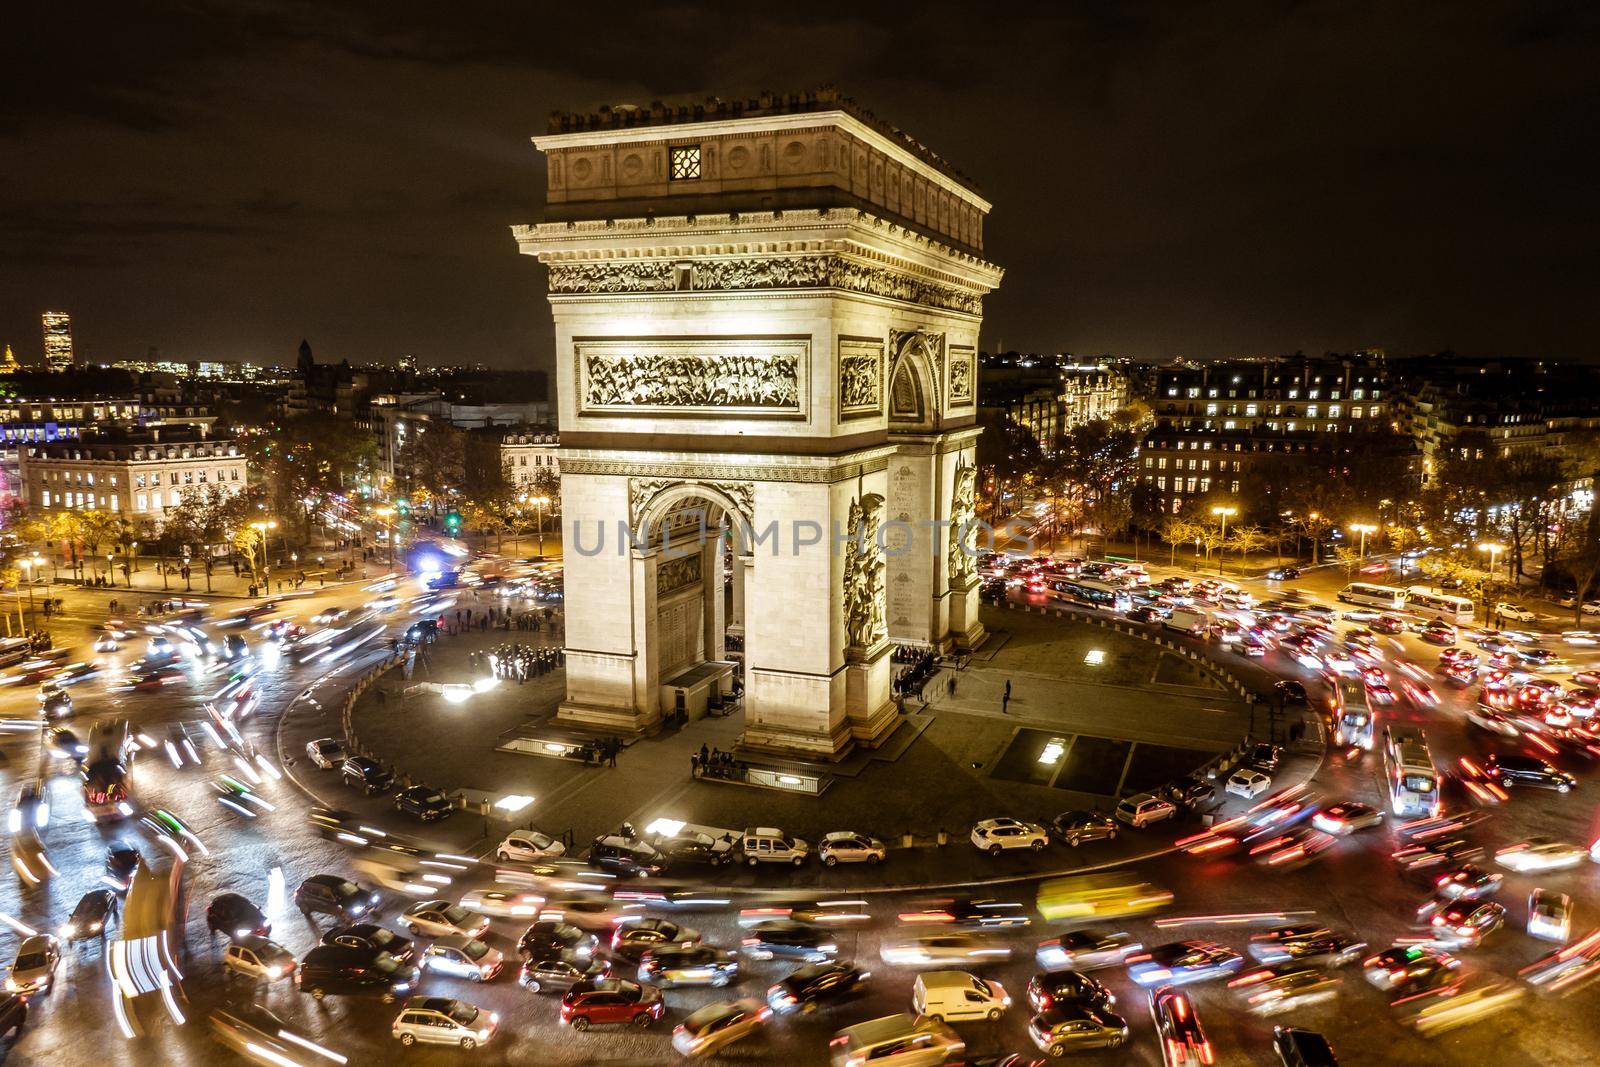 Triumphal Arch of the Star at Night. It is one of the most famous monuments in Paris.